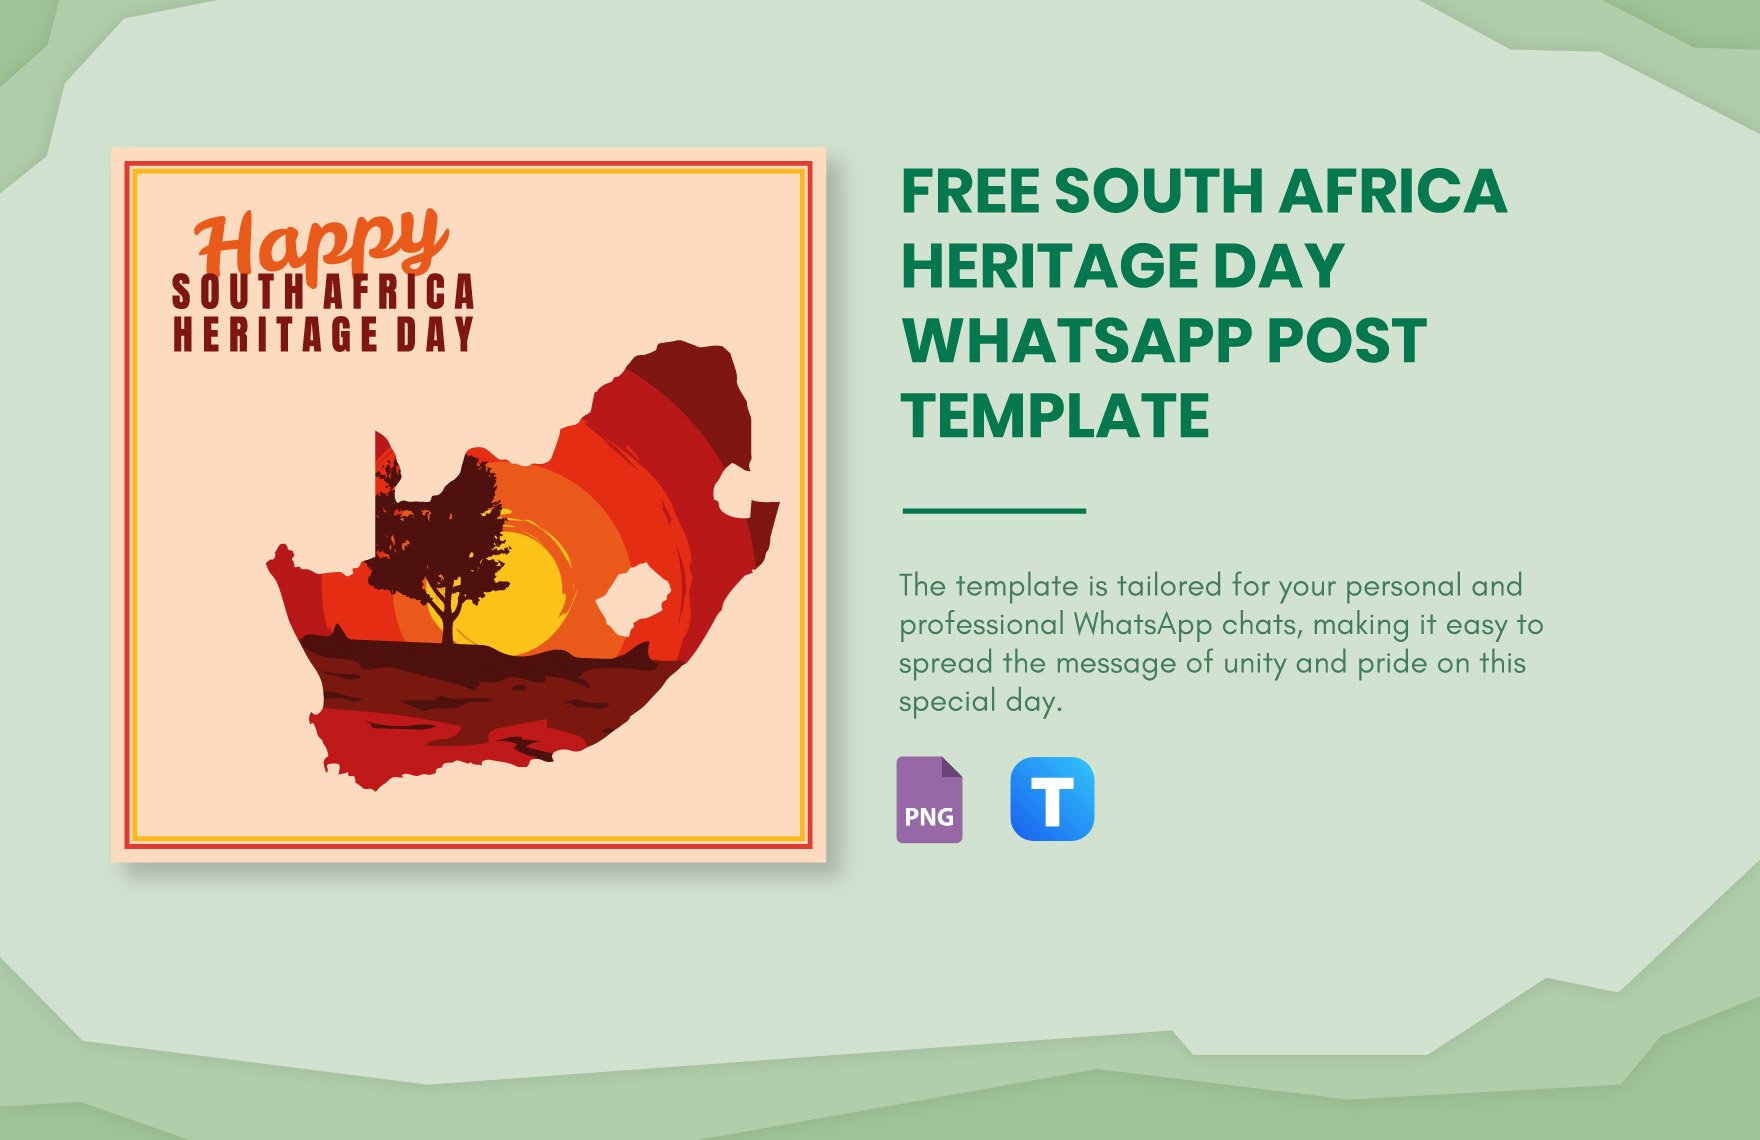 Free South Africa Heritage Day WhatsApp Post Template in PNG